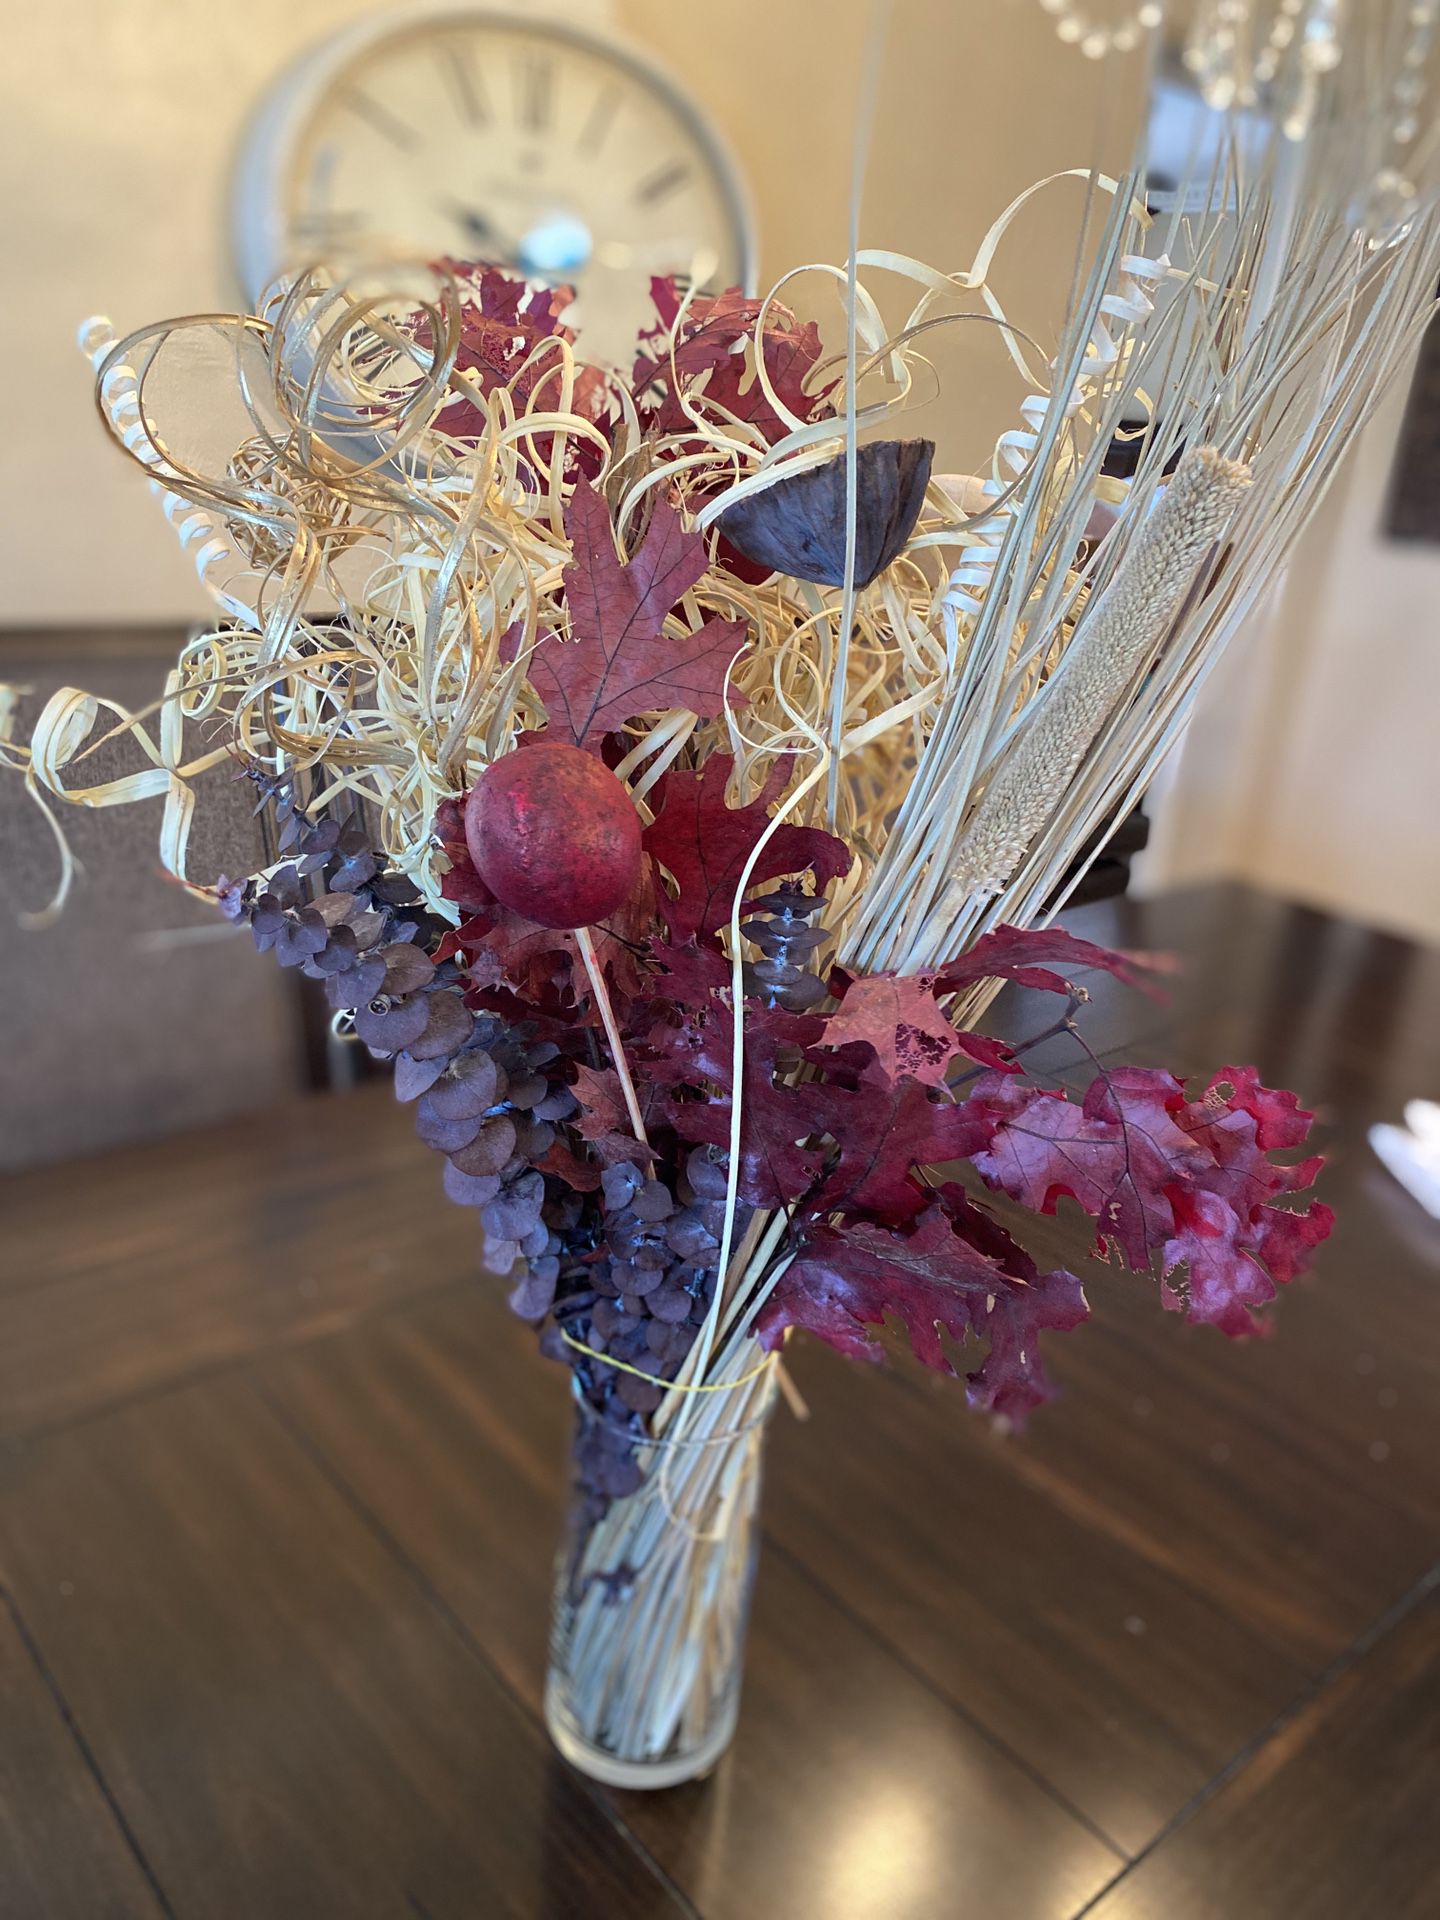 Fall Arrangement dry flowers with glass vase